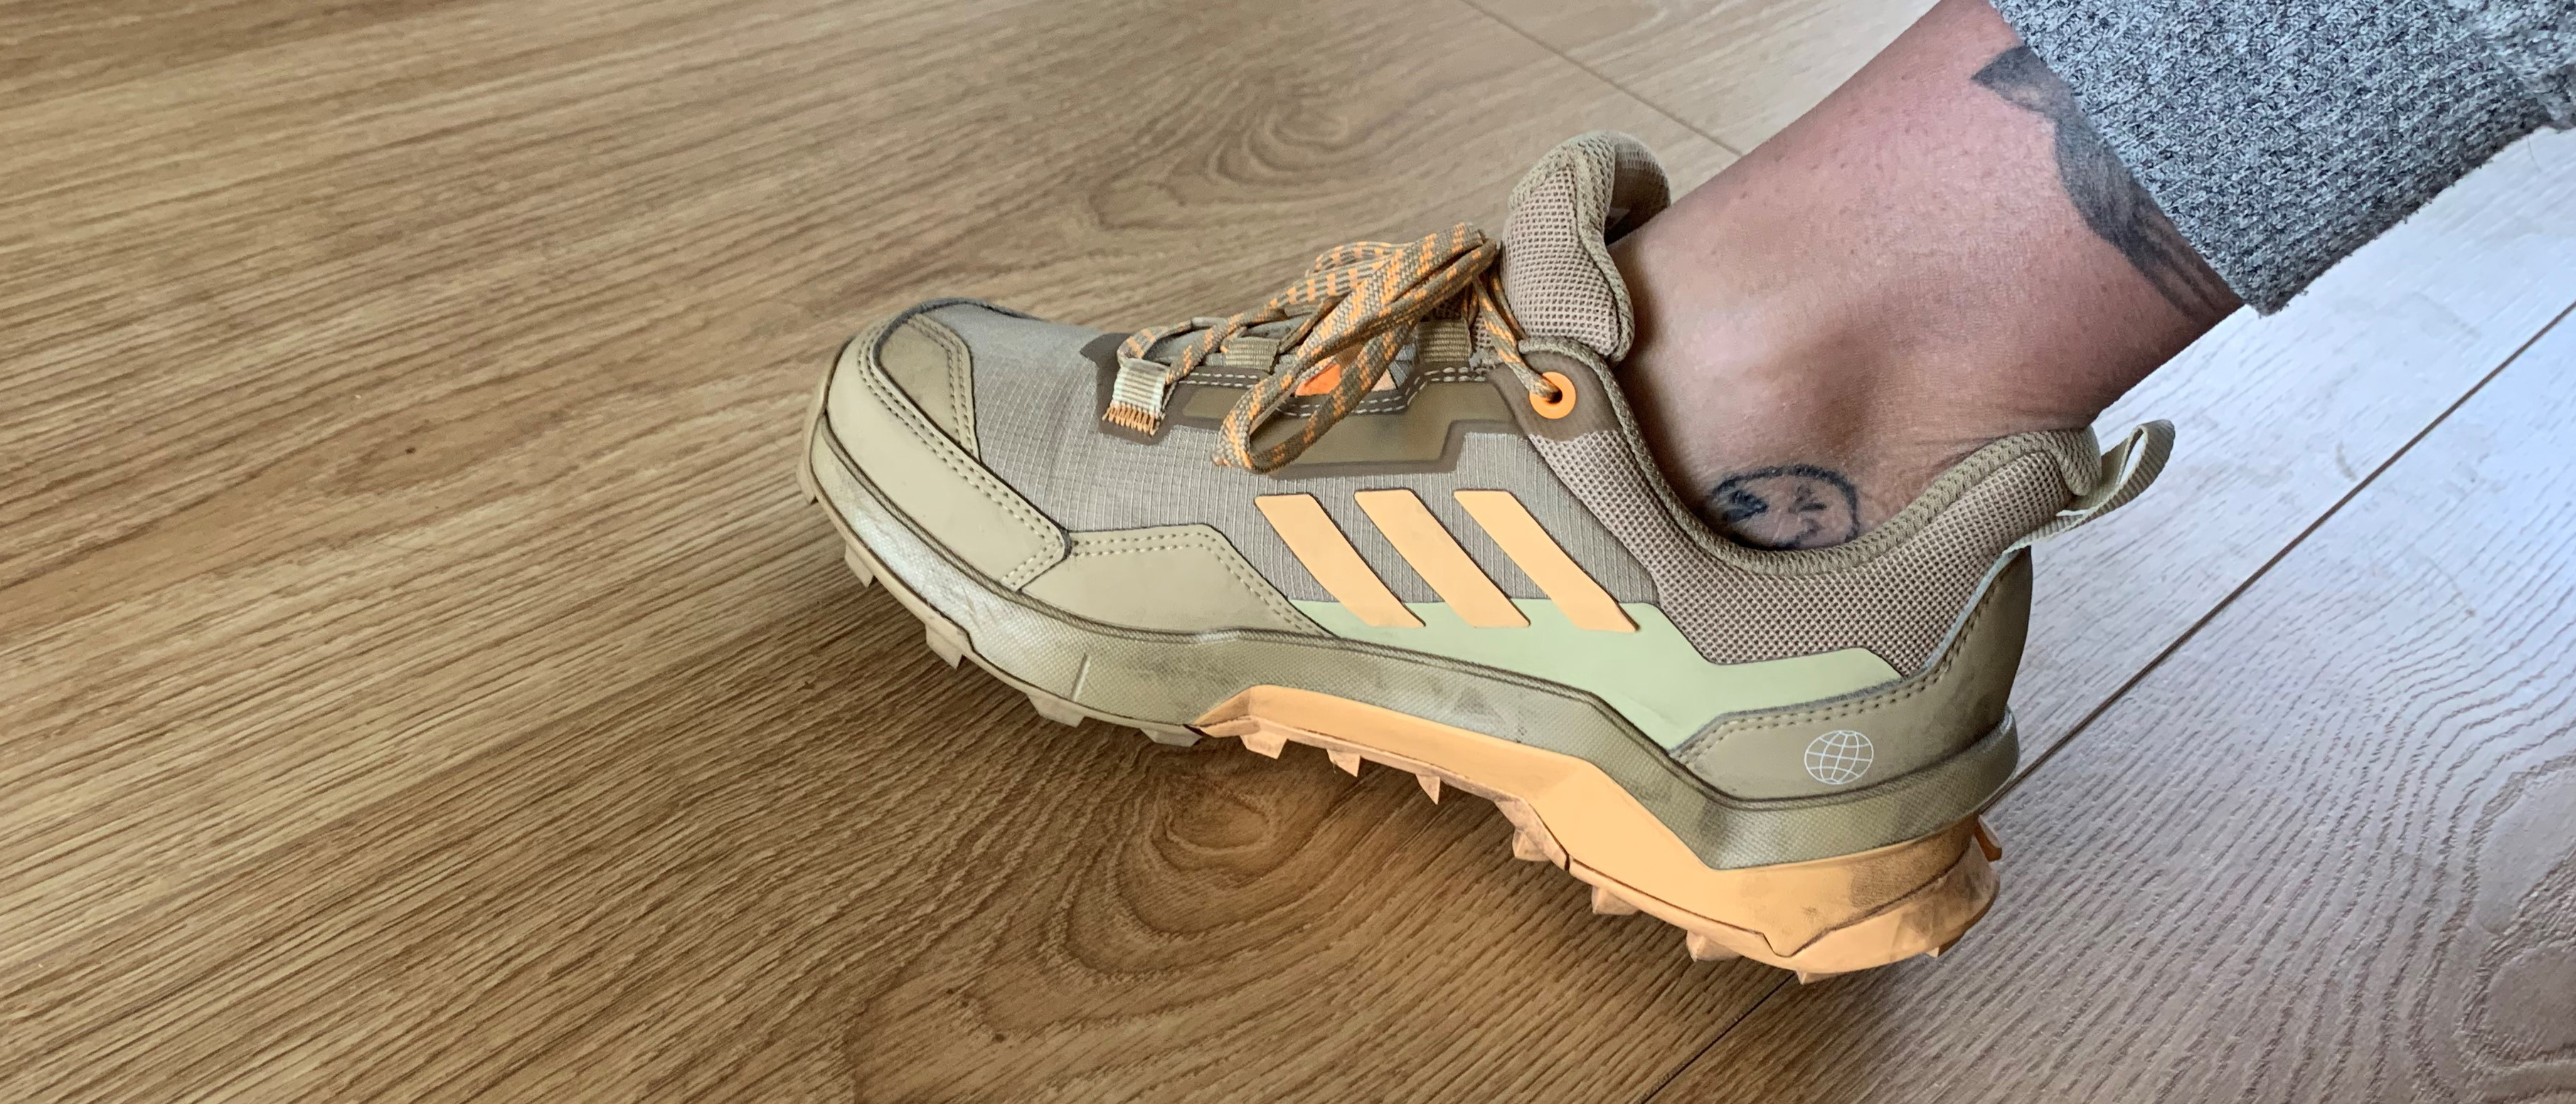 Adidas adidas terrex hike Terrex AX4 GORE-TEX review: A sturdy hiking shoe for the